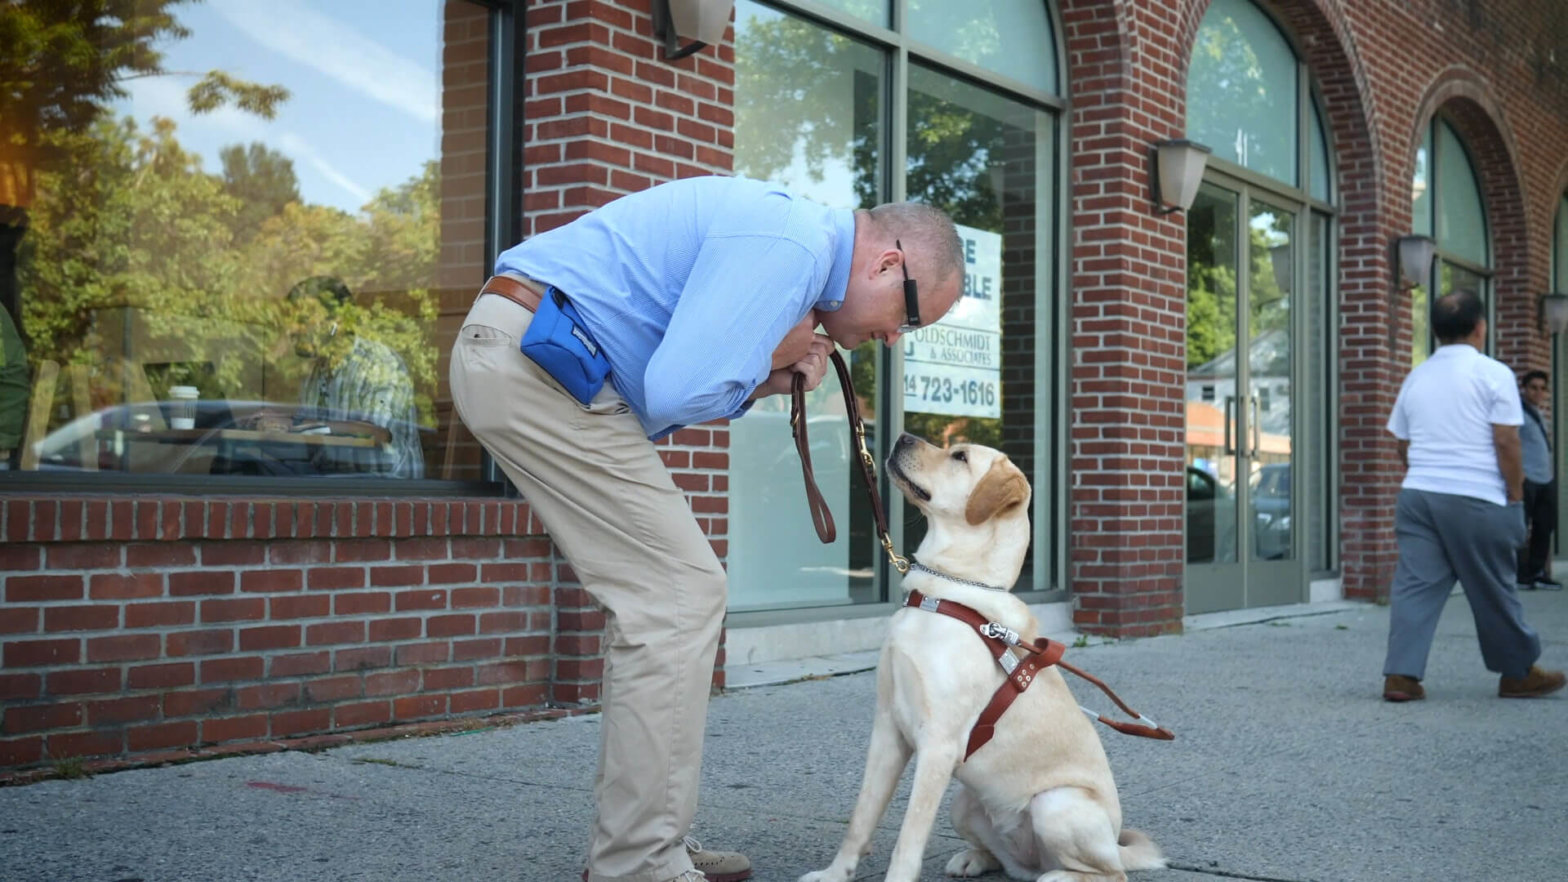 David bends down to share a moment with guide dog Tessi, a yellow lab in harness.